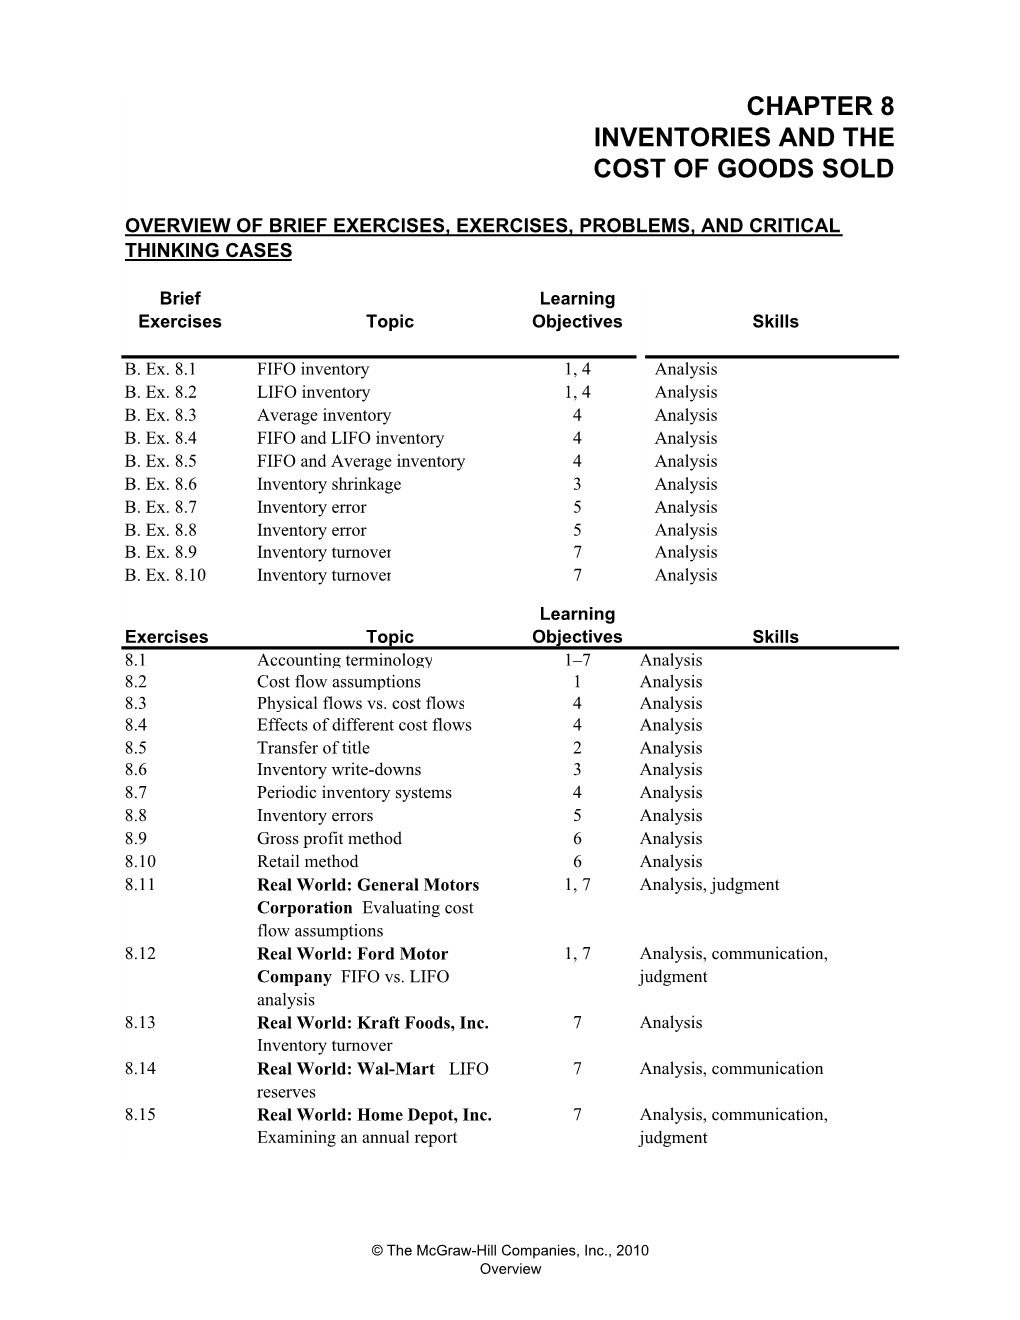 Chapter 8 Inventories and the Cost of Goods Sold